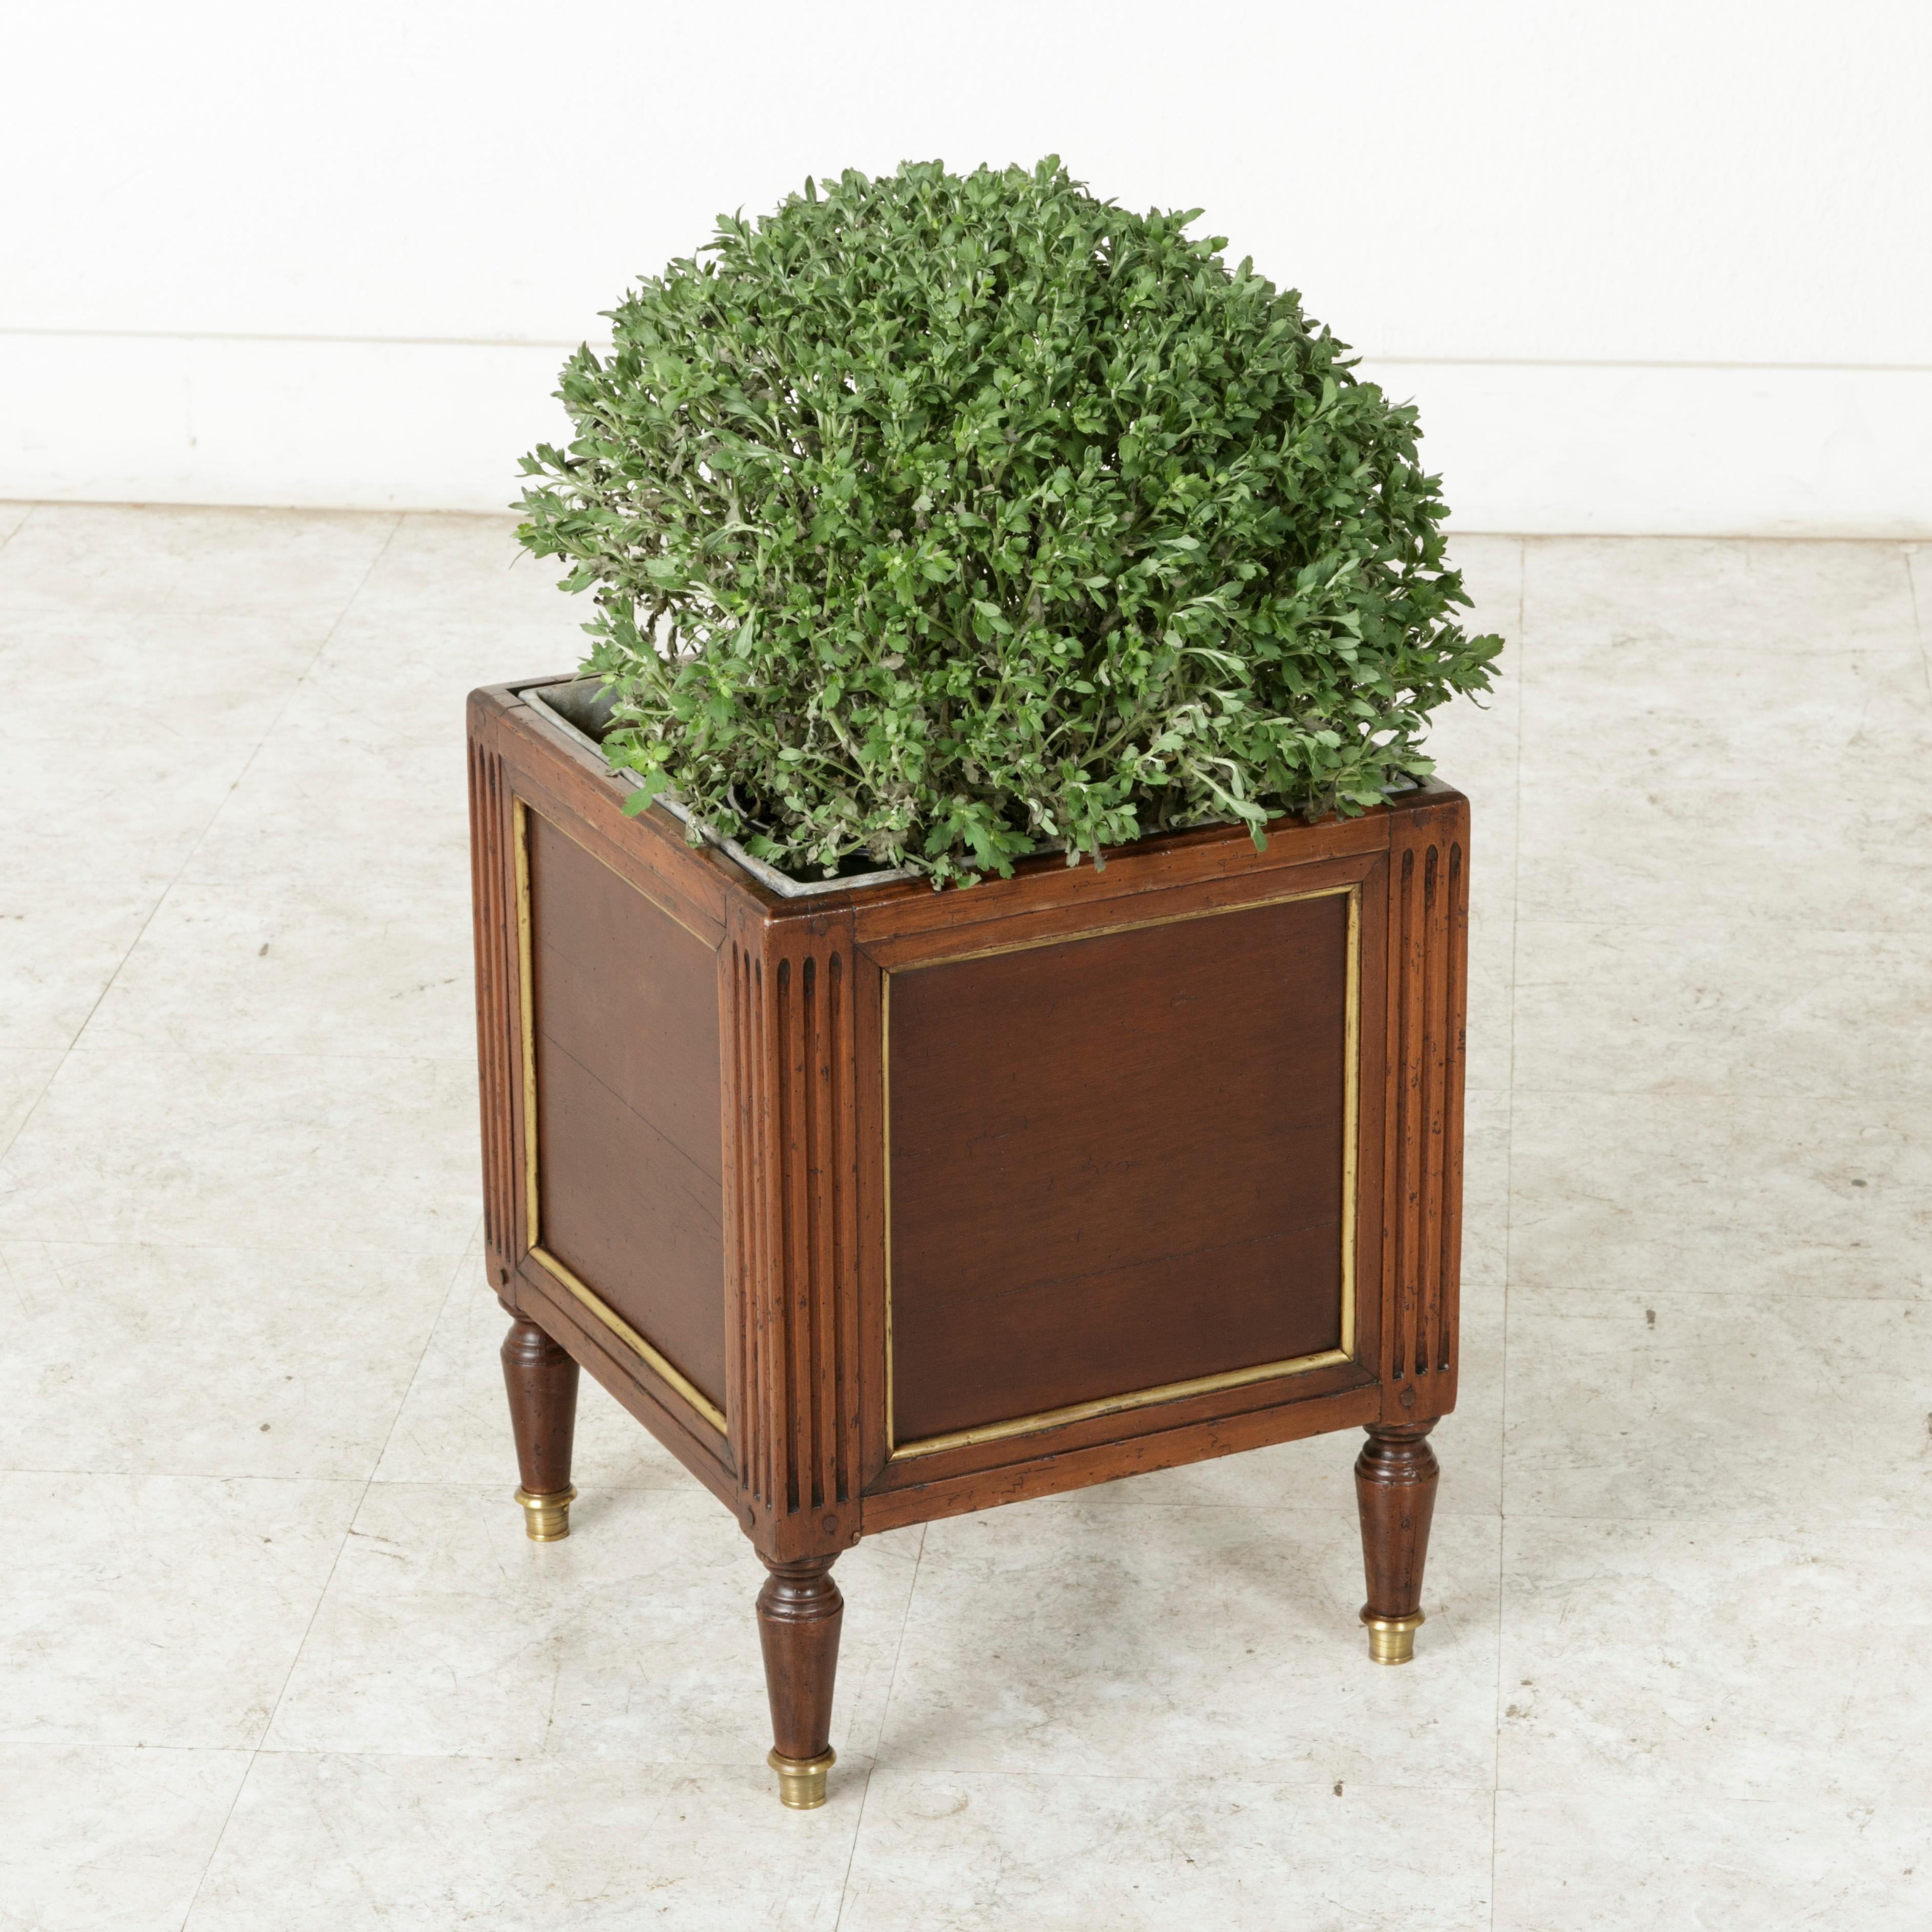 This French Louis XVI style mahogany square planter or jardinière from the late 19th century features bronze trim around each of its paneled sides. Classic fluted corners rest on tapered legs finished with bronze sabots. Its original zinc liner has